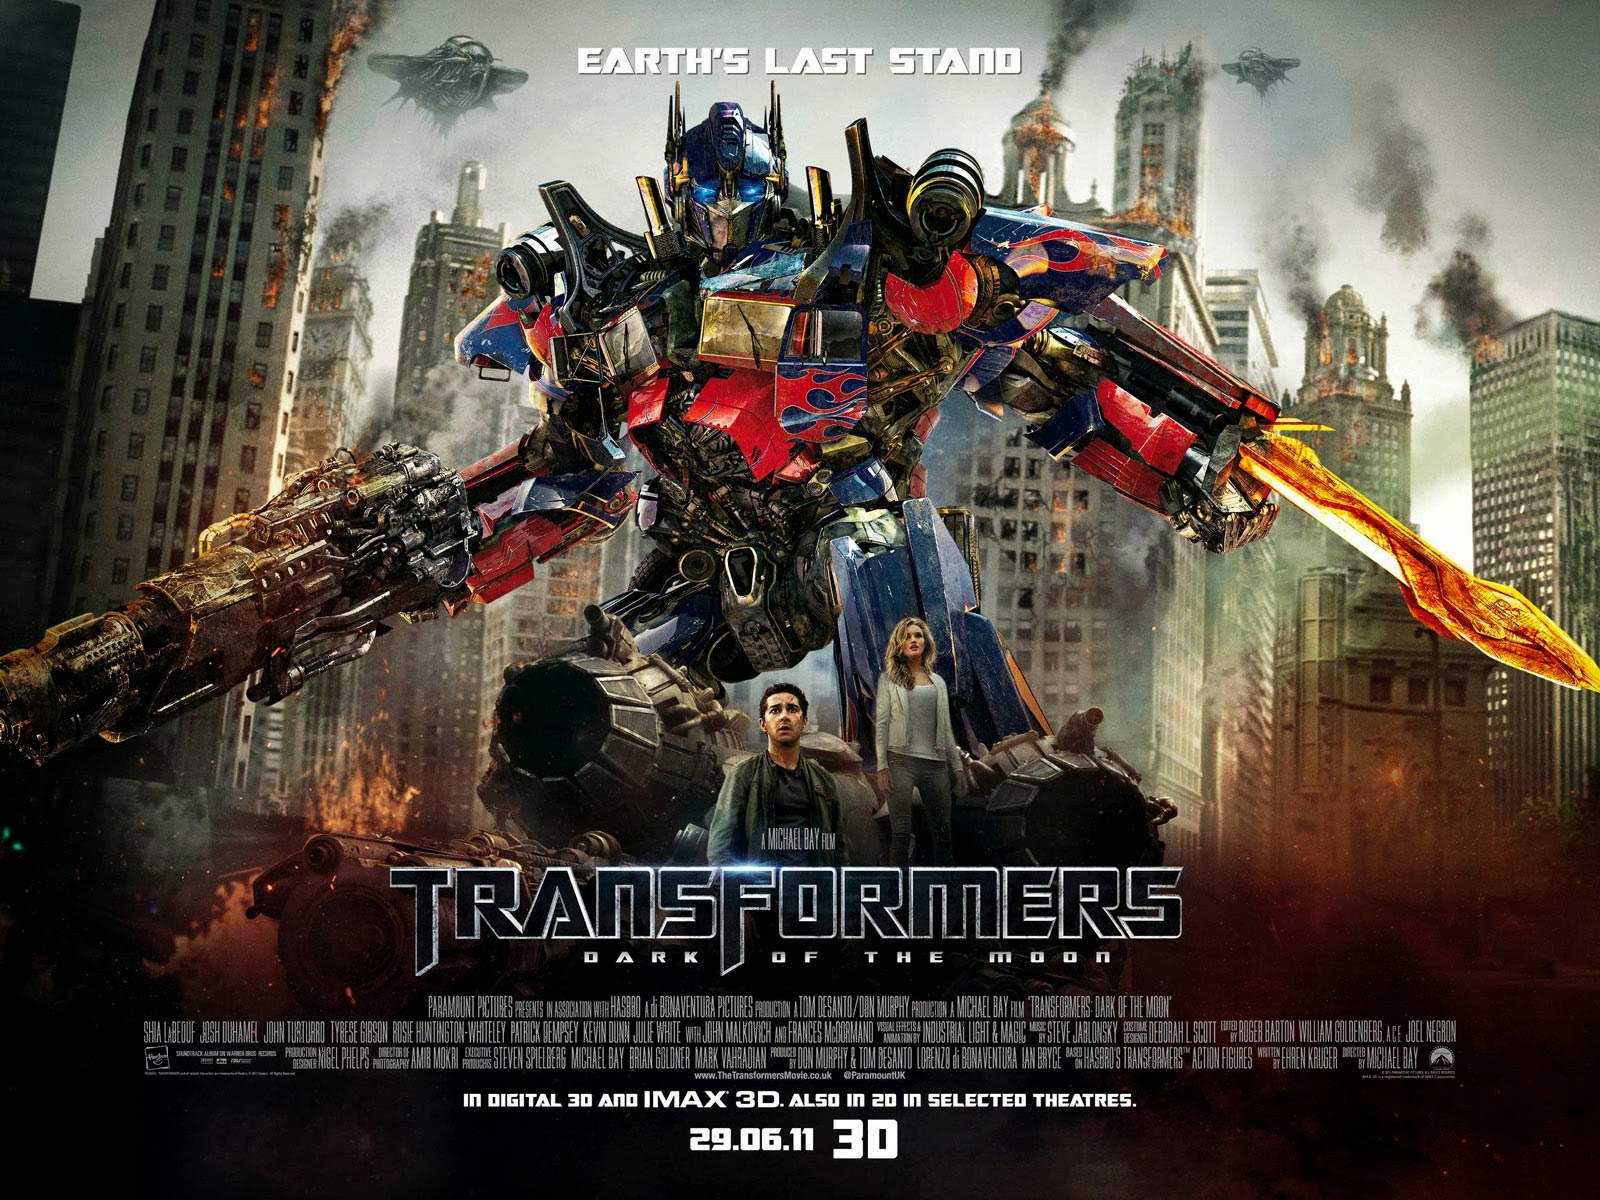 Download Transformers 3: Dark of the Moon (2011) BluRay 720p